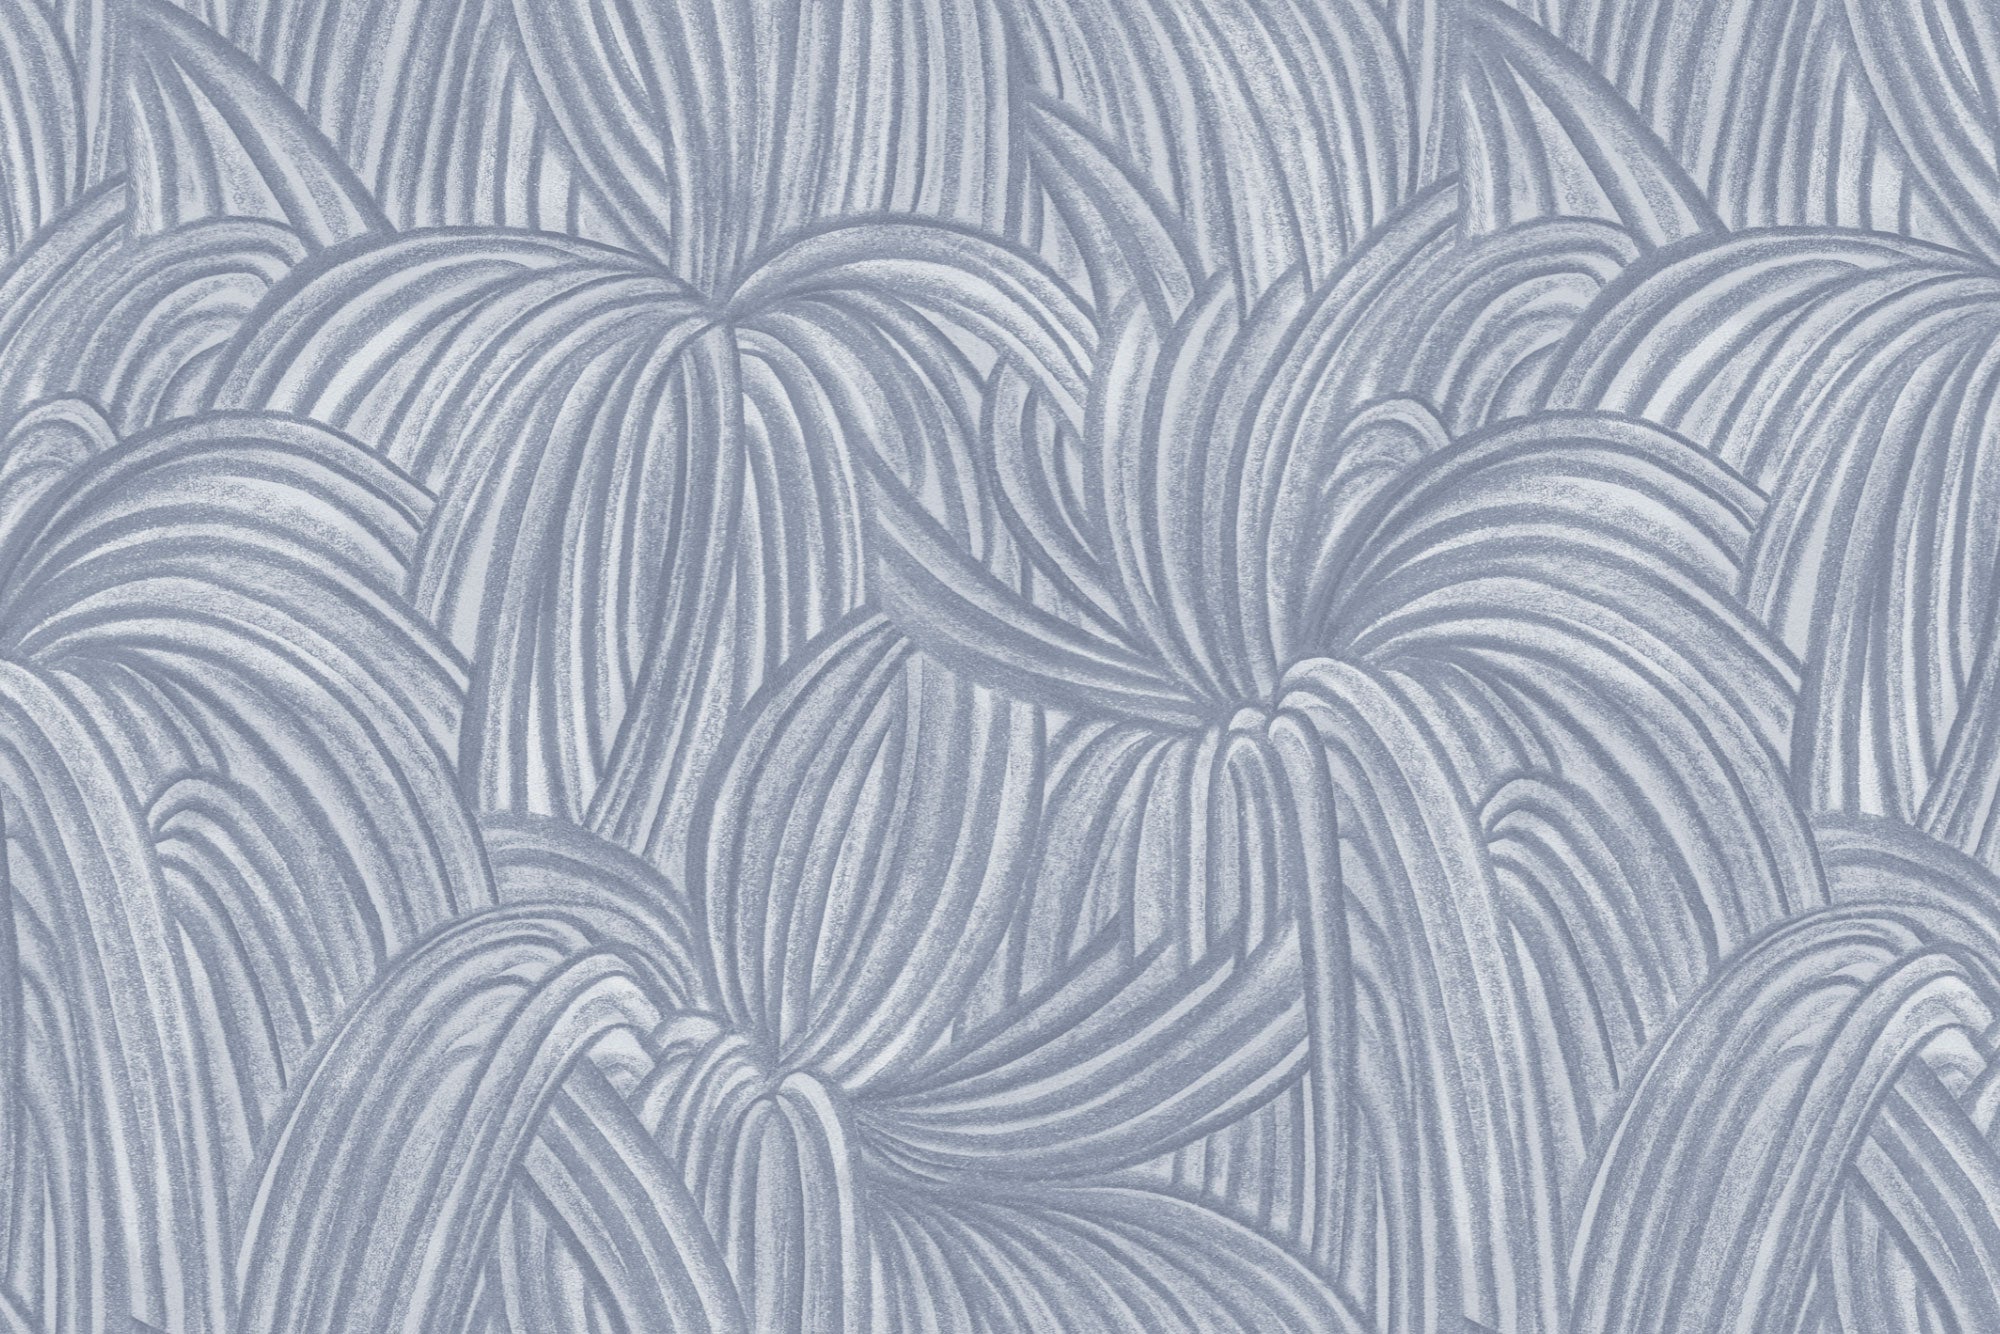 Detail of wallpaper in a textural painted print in blue on a cream field.